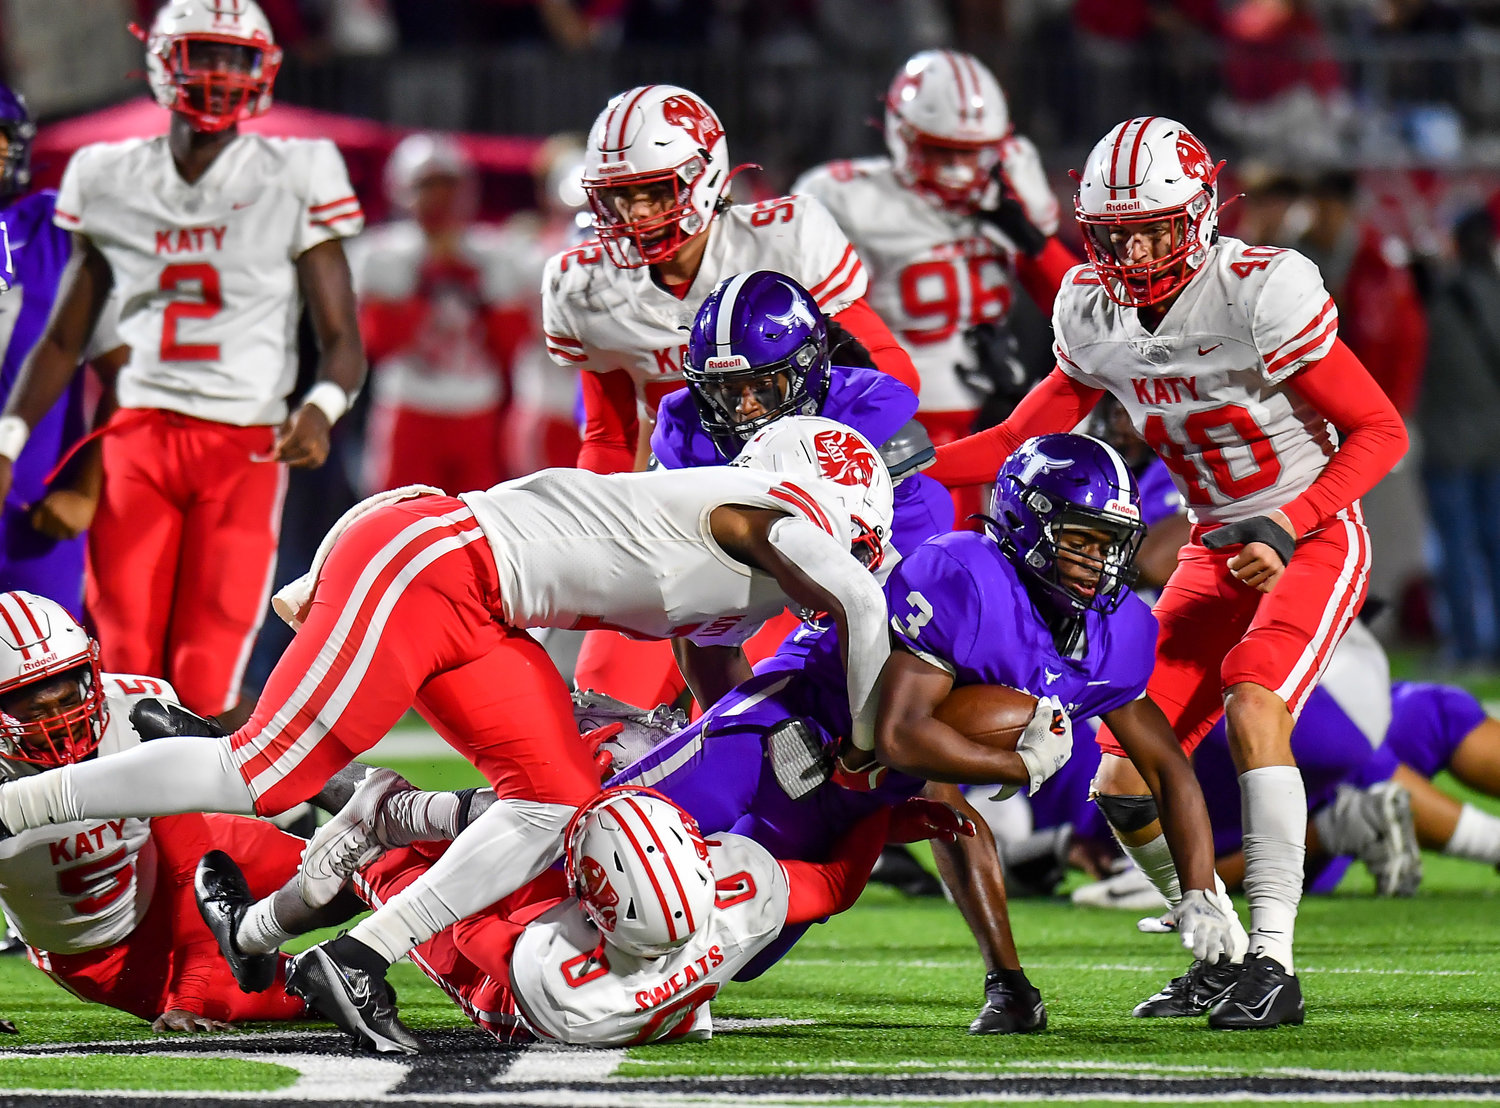 Katy, Tx. Nov 5, 2021: Morton Ranch Santana Scott #3 carries the ball before being brought down by Katy defenders during a conference game between Katy and Morton Ranch at Legacy Stadium in Katy. (Photo by Mark Goodman / Katy Times)